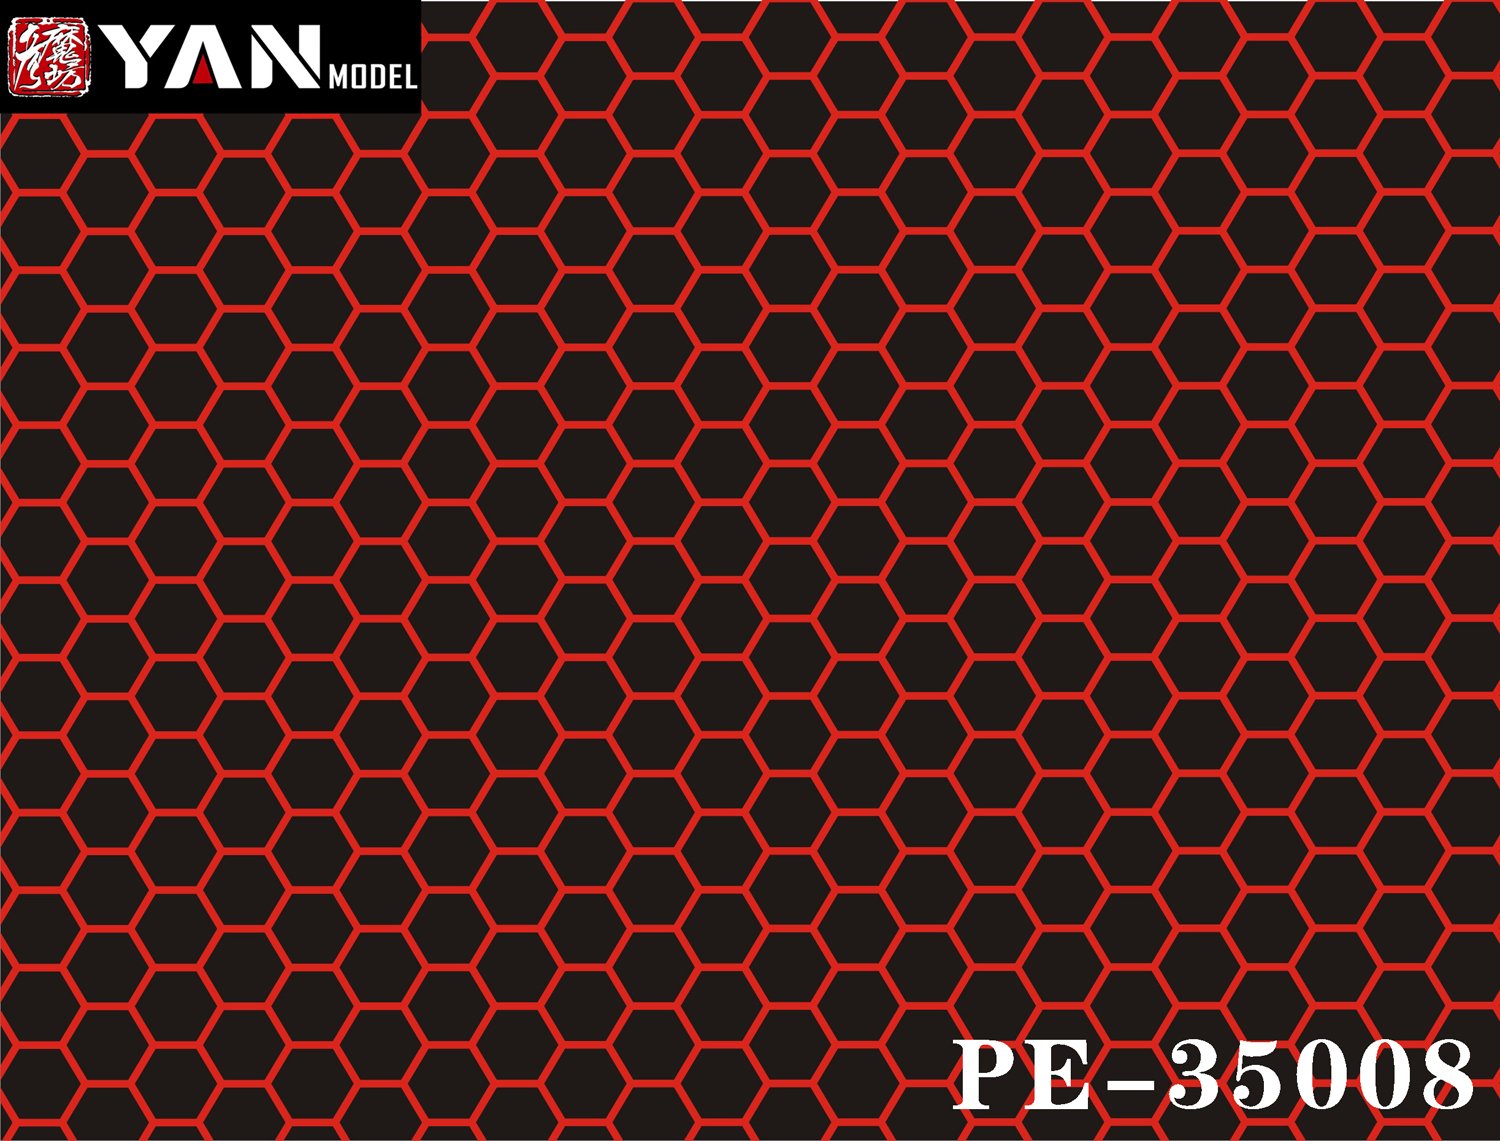 1/35 Hexagon Camouflage Net for Tank - Click Image to Close